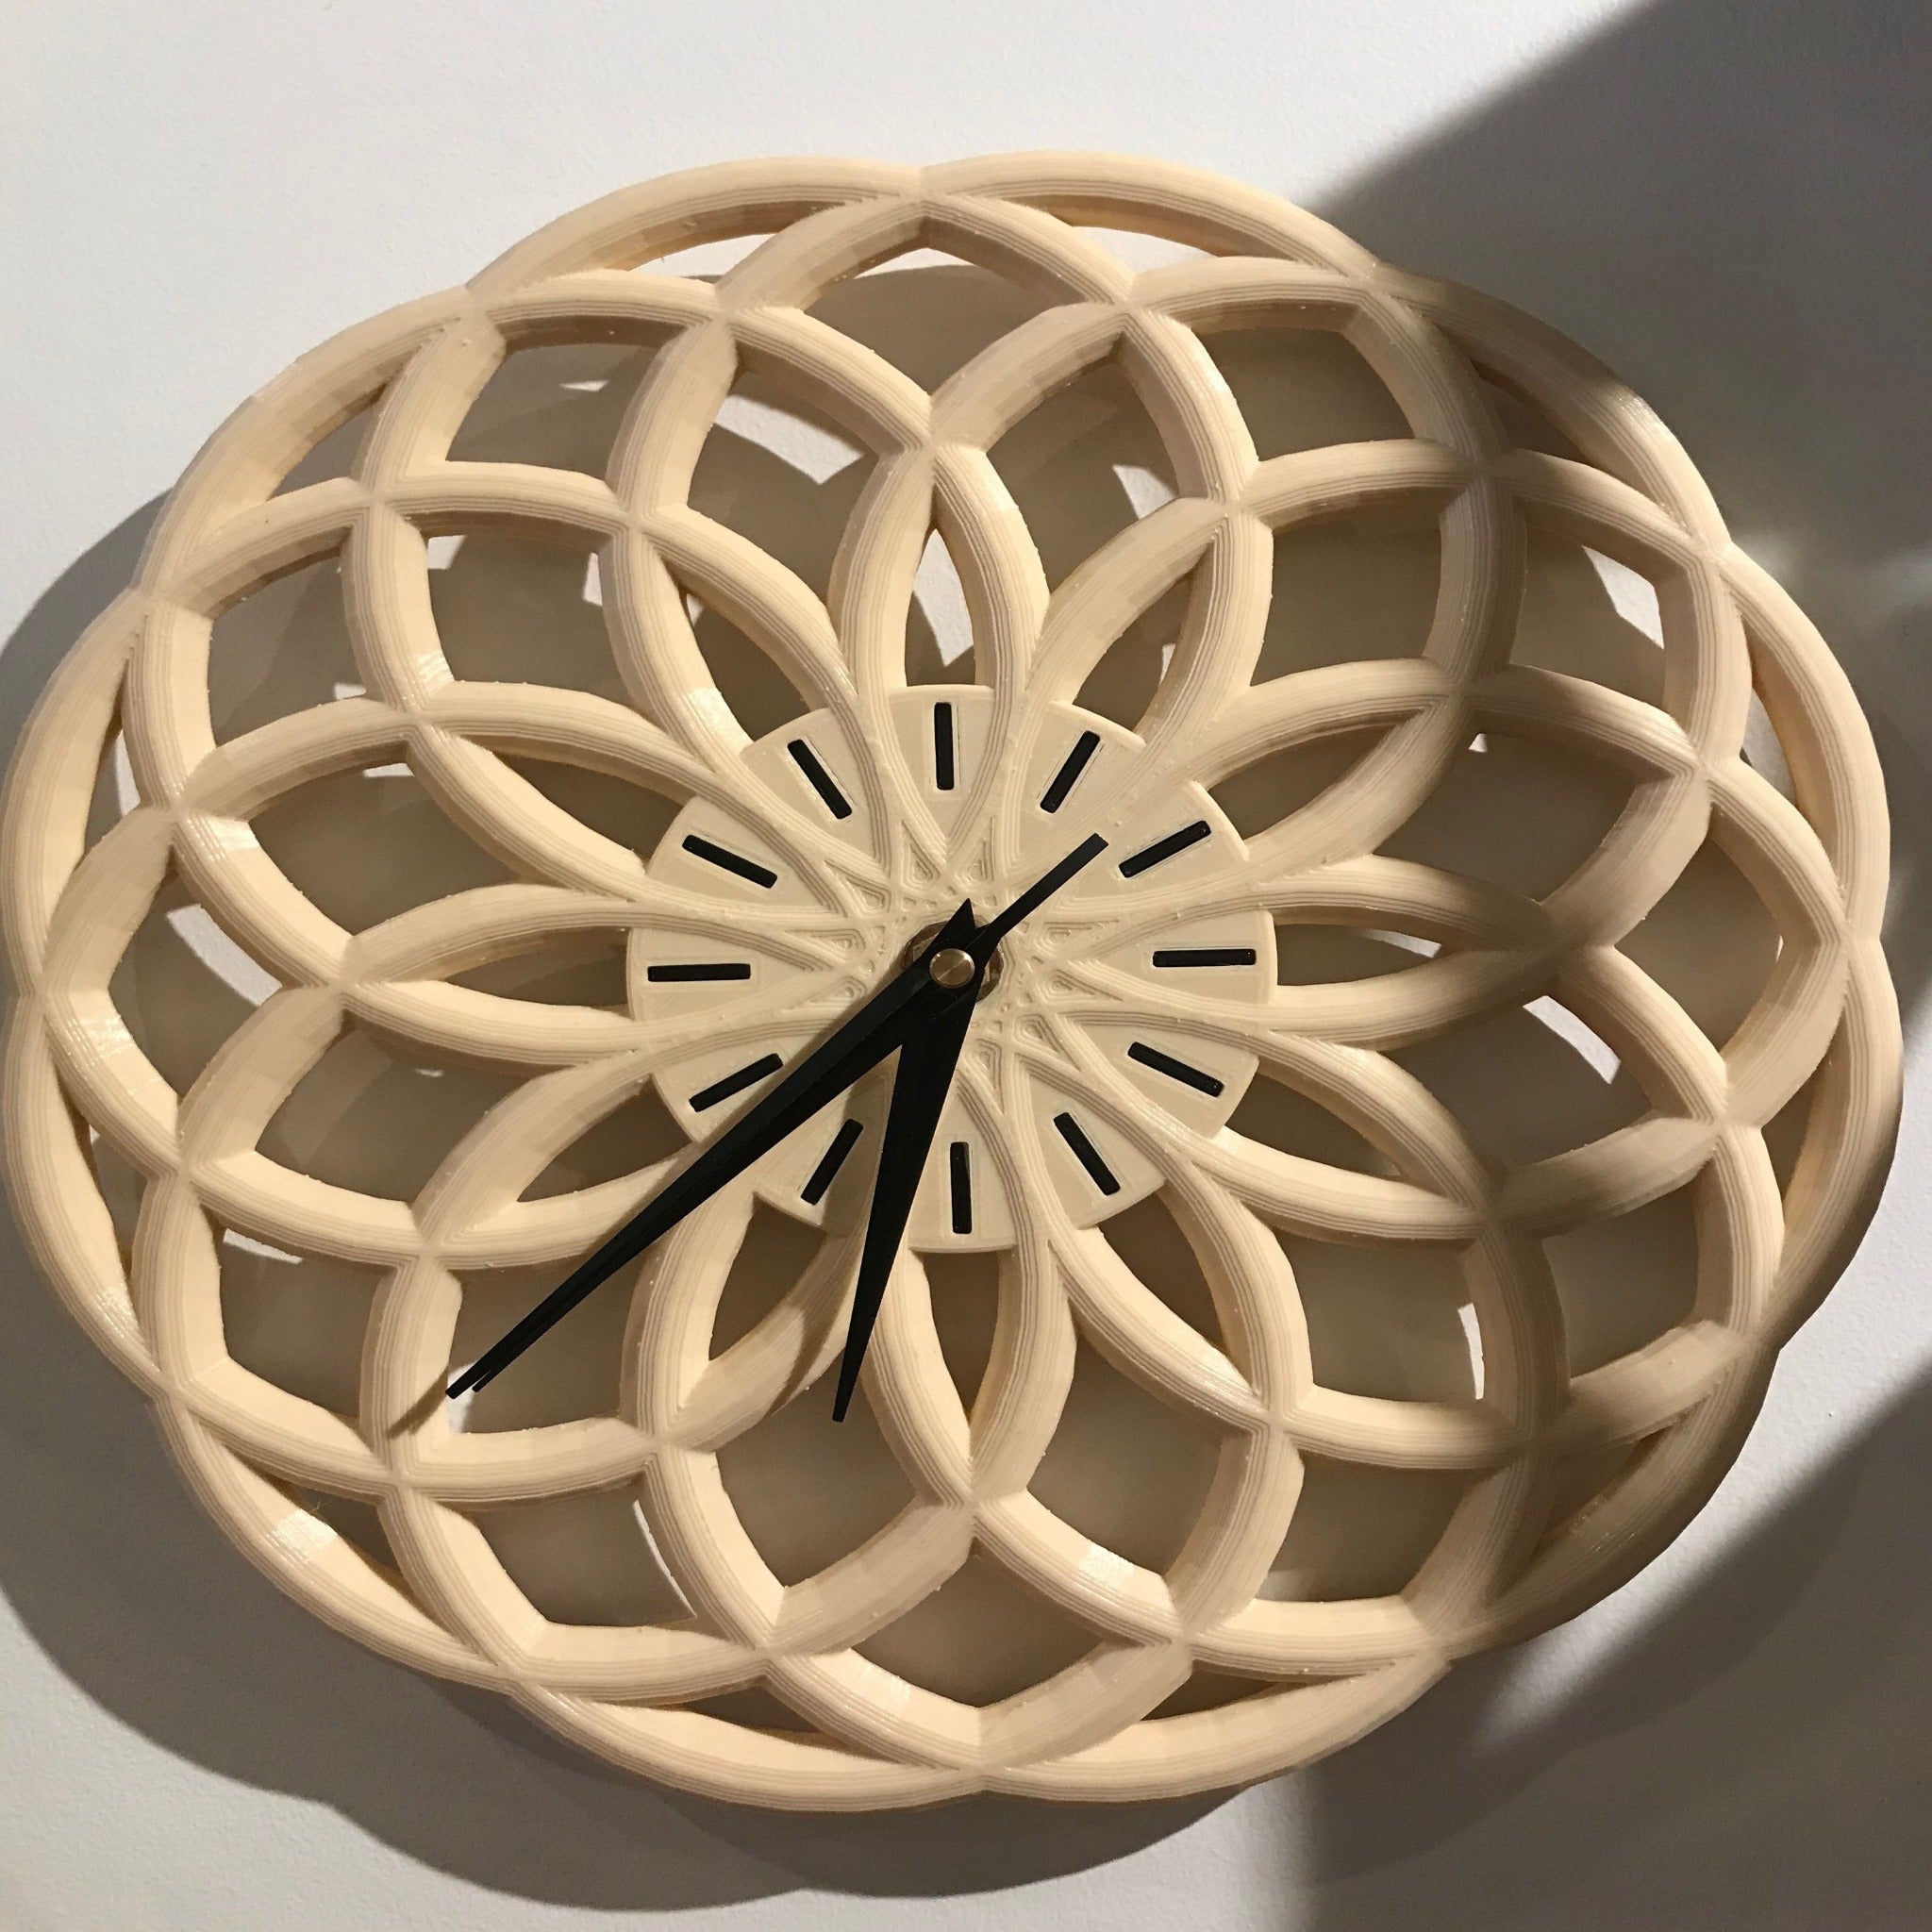 3D printed clock designed and printed by local NJ artist 